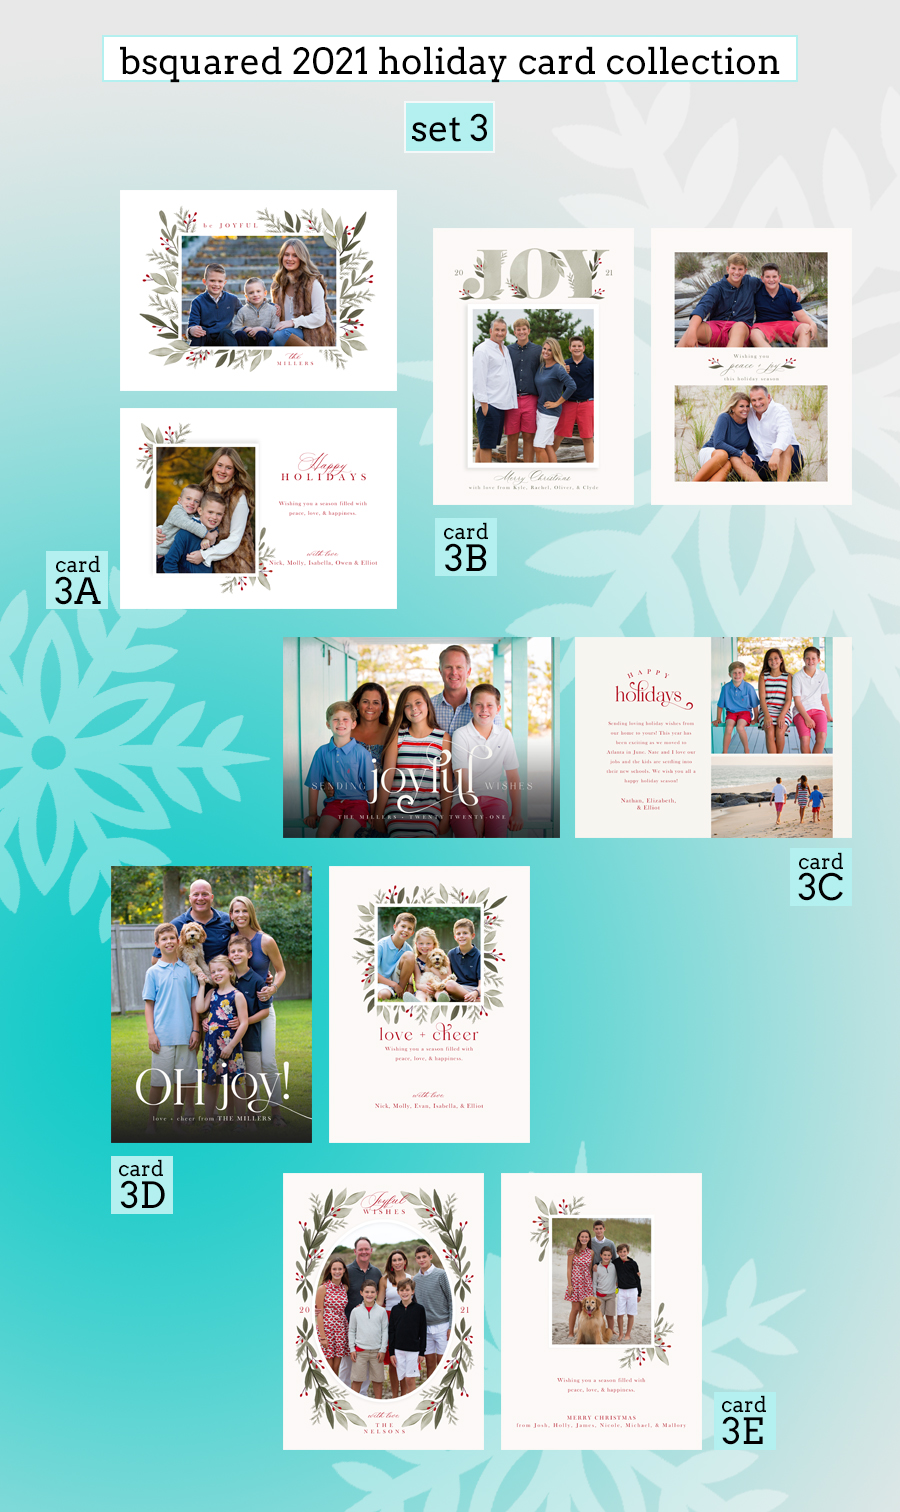 bsquared 2021 holiday cards 3